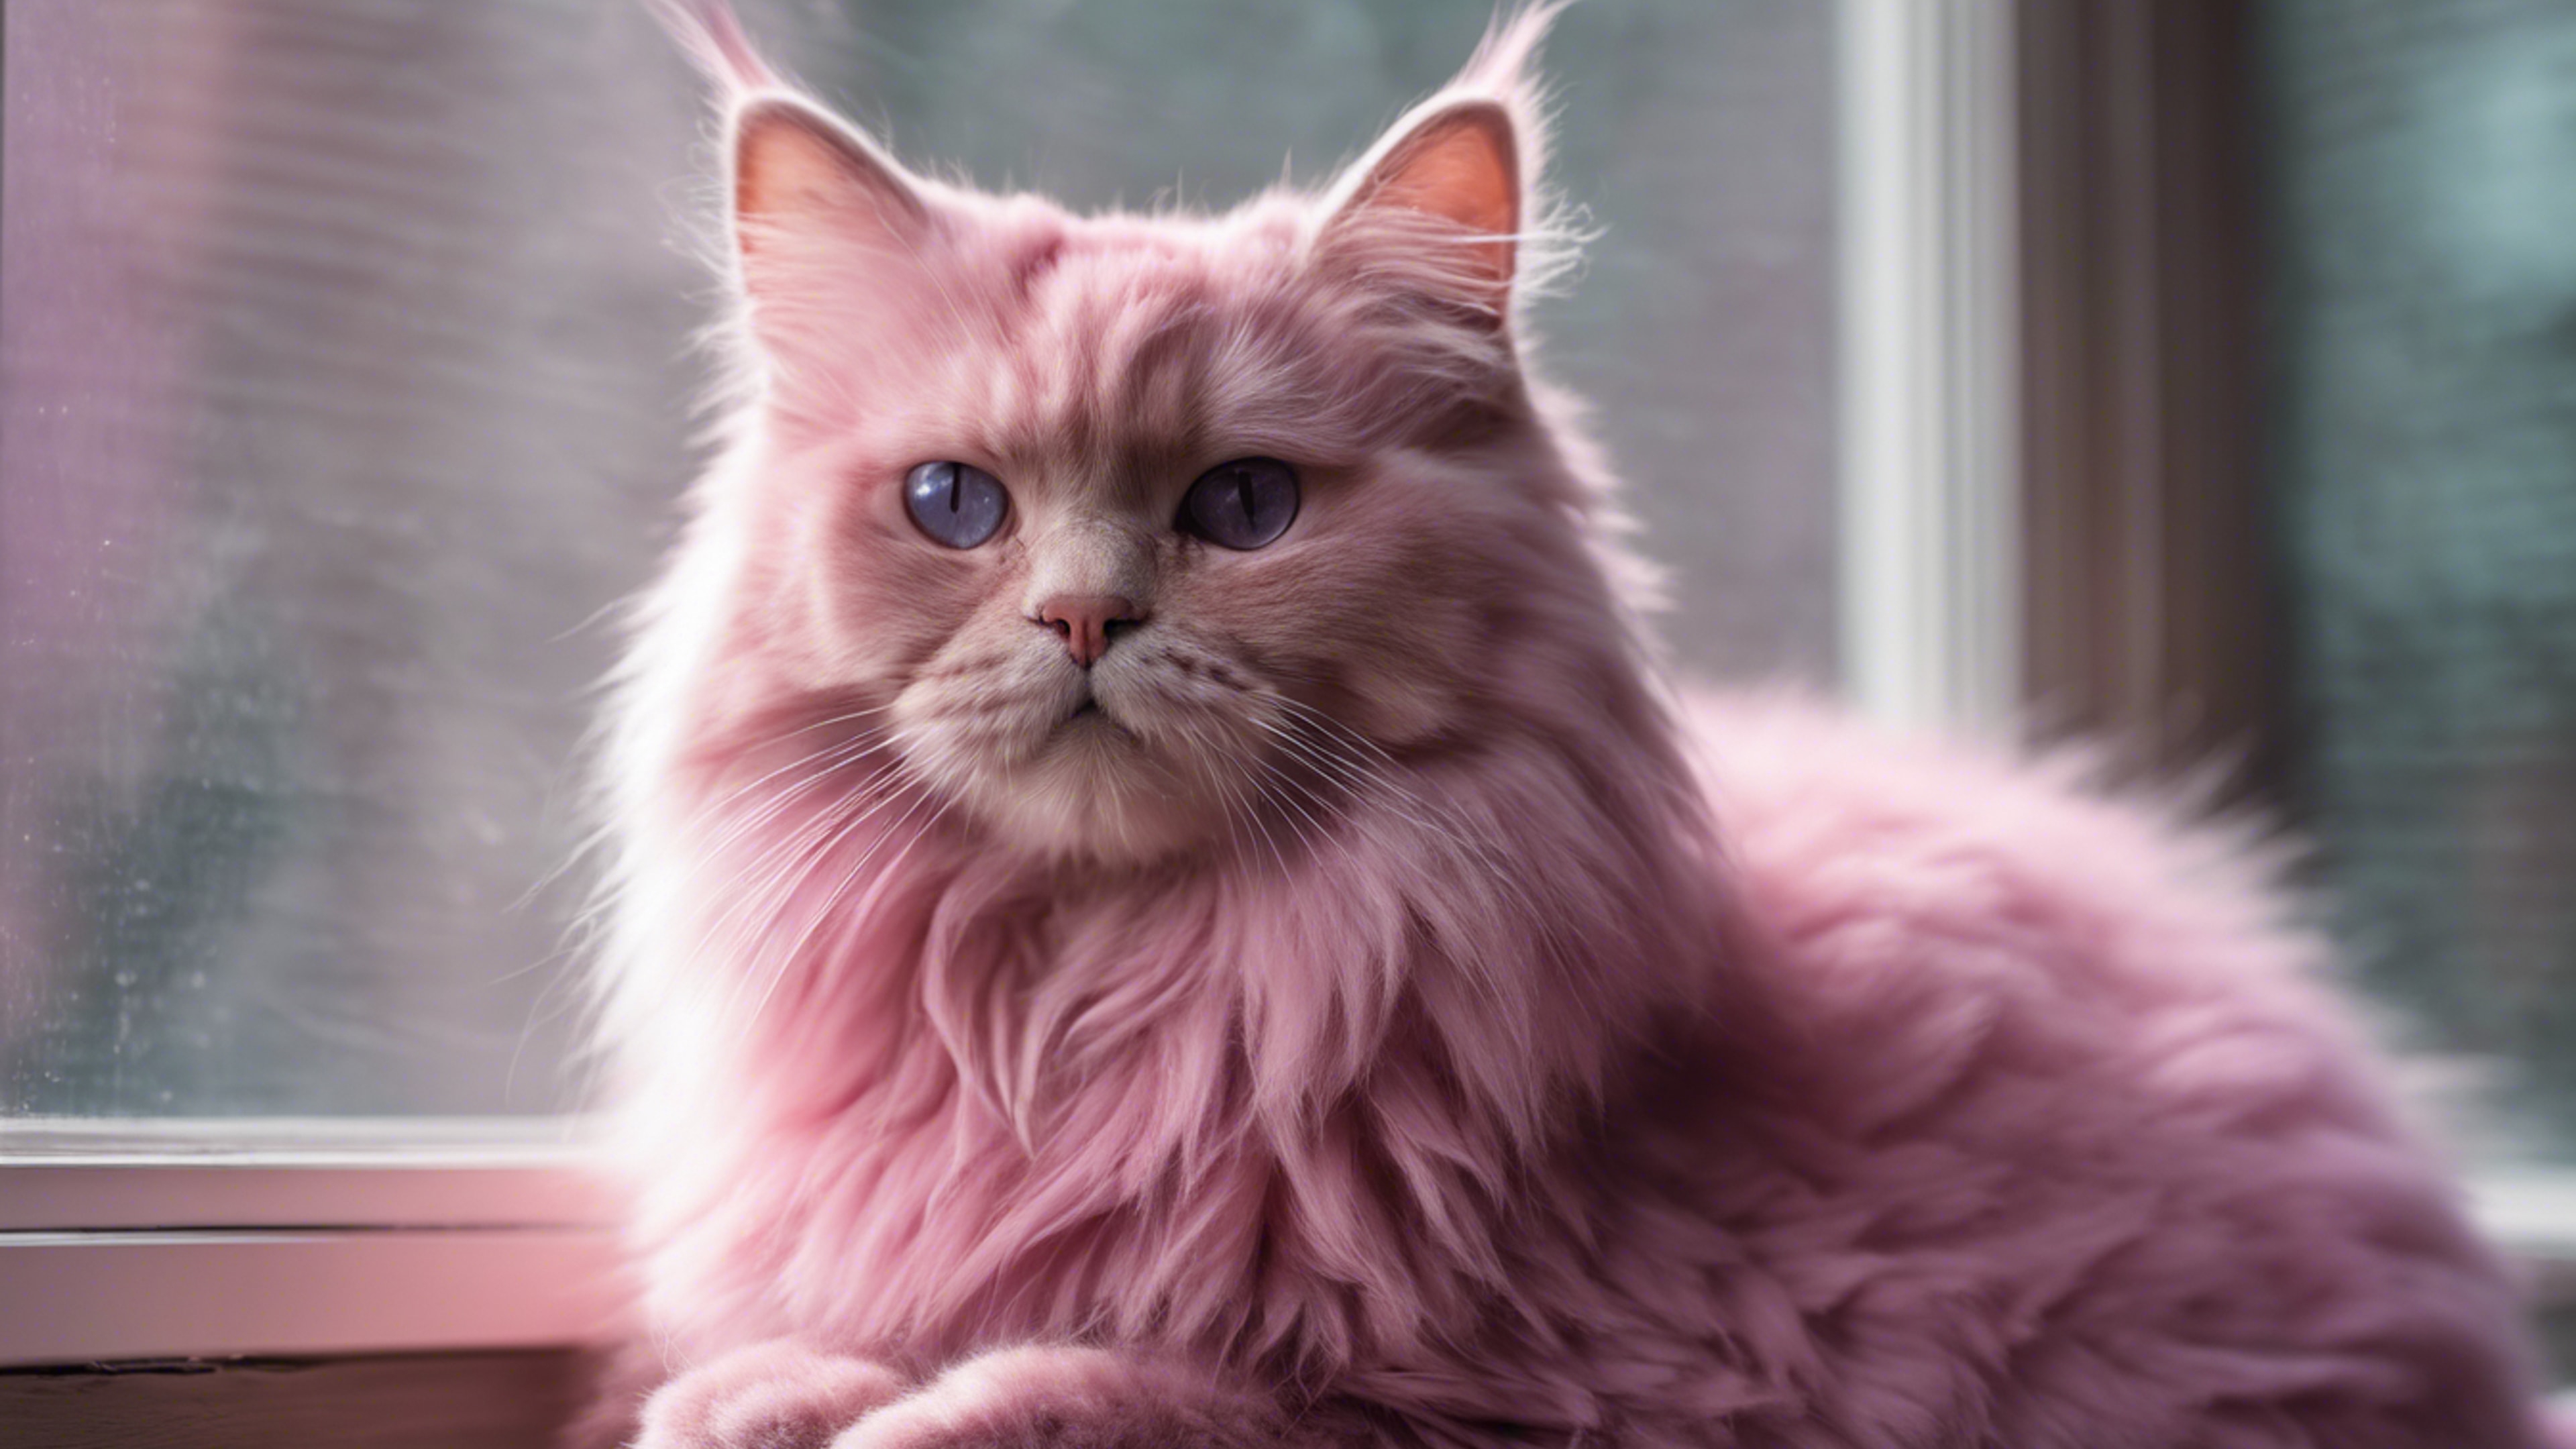 A fluffy pink cat with piercing purple eyes sitting on a windowsill. Wallpaper[7ff128f0be8e44d39fd4]